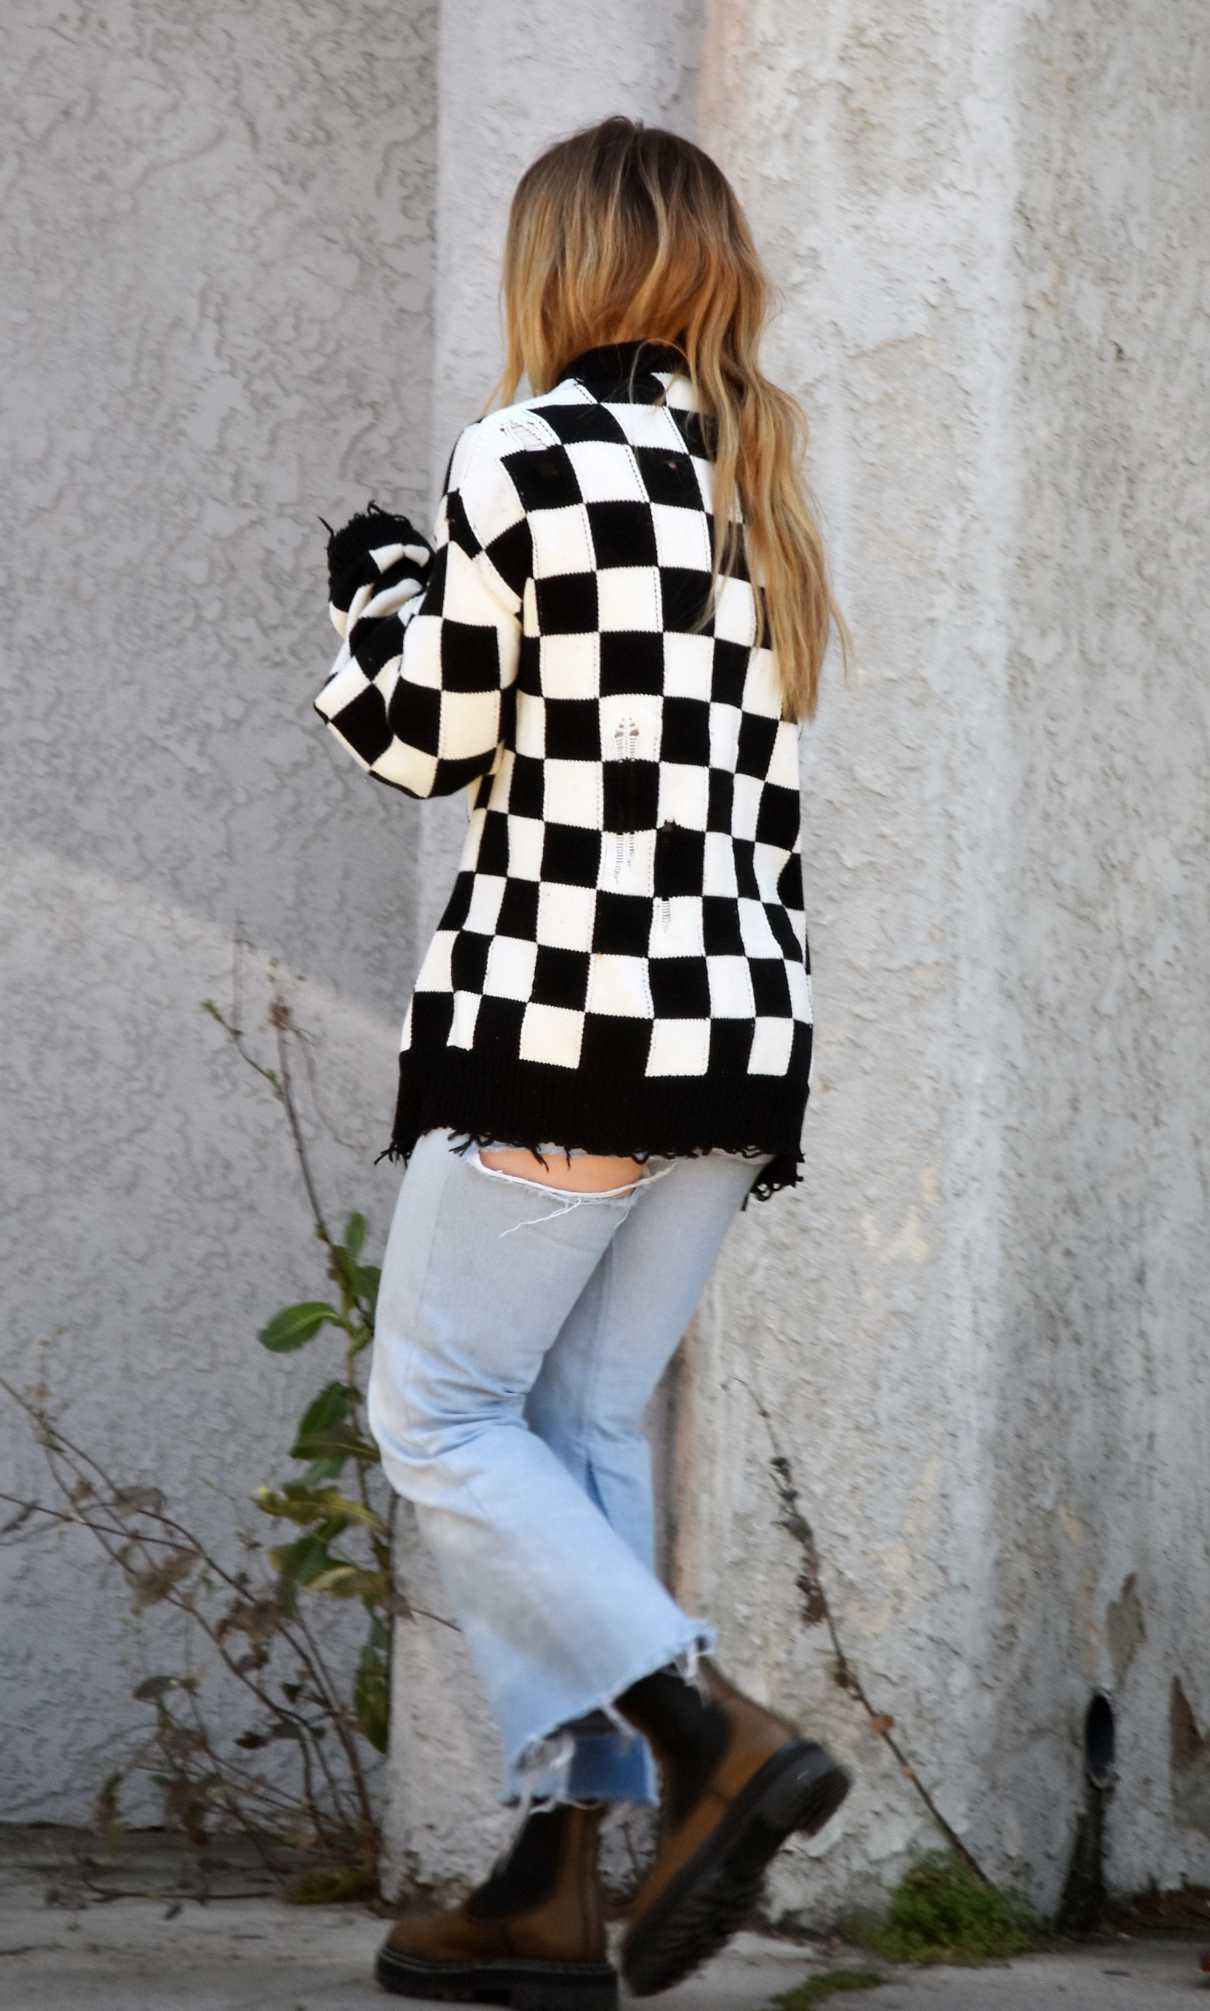 Hilary Duff in a Checked Cardigan